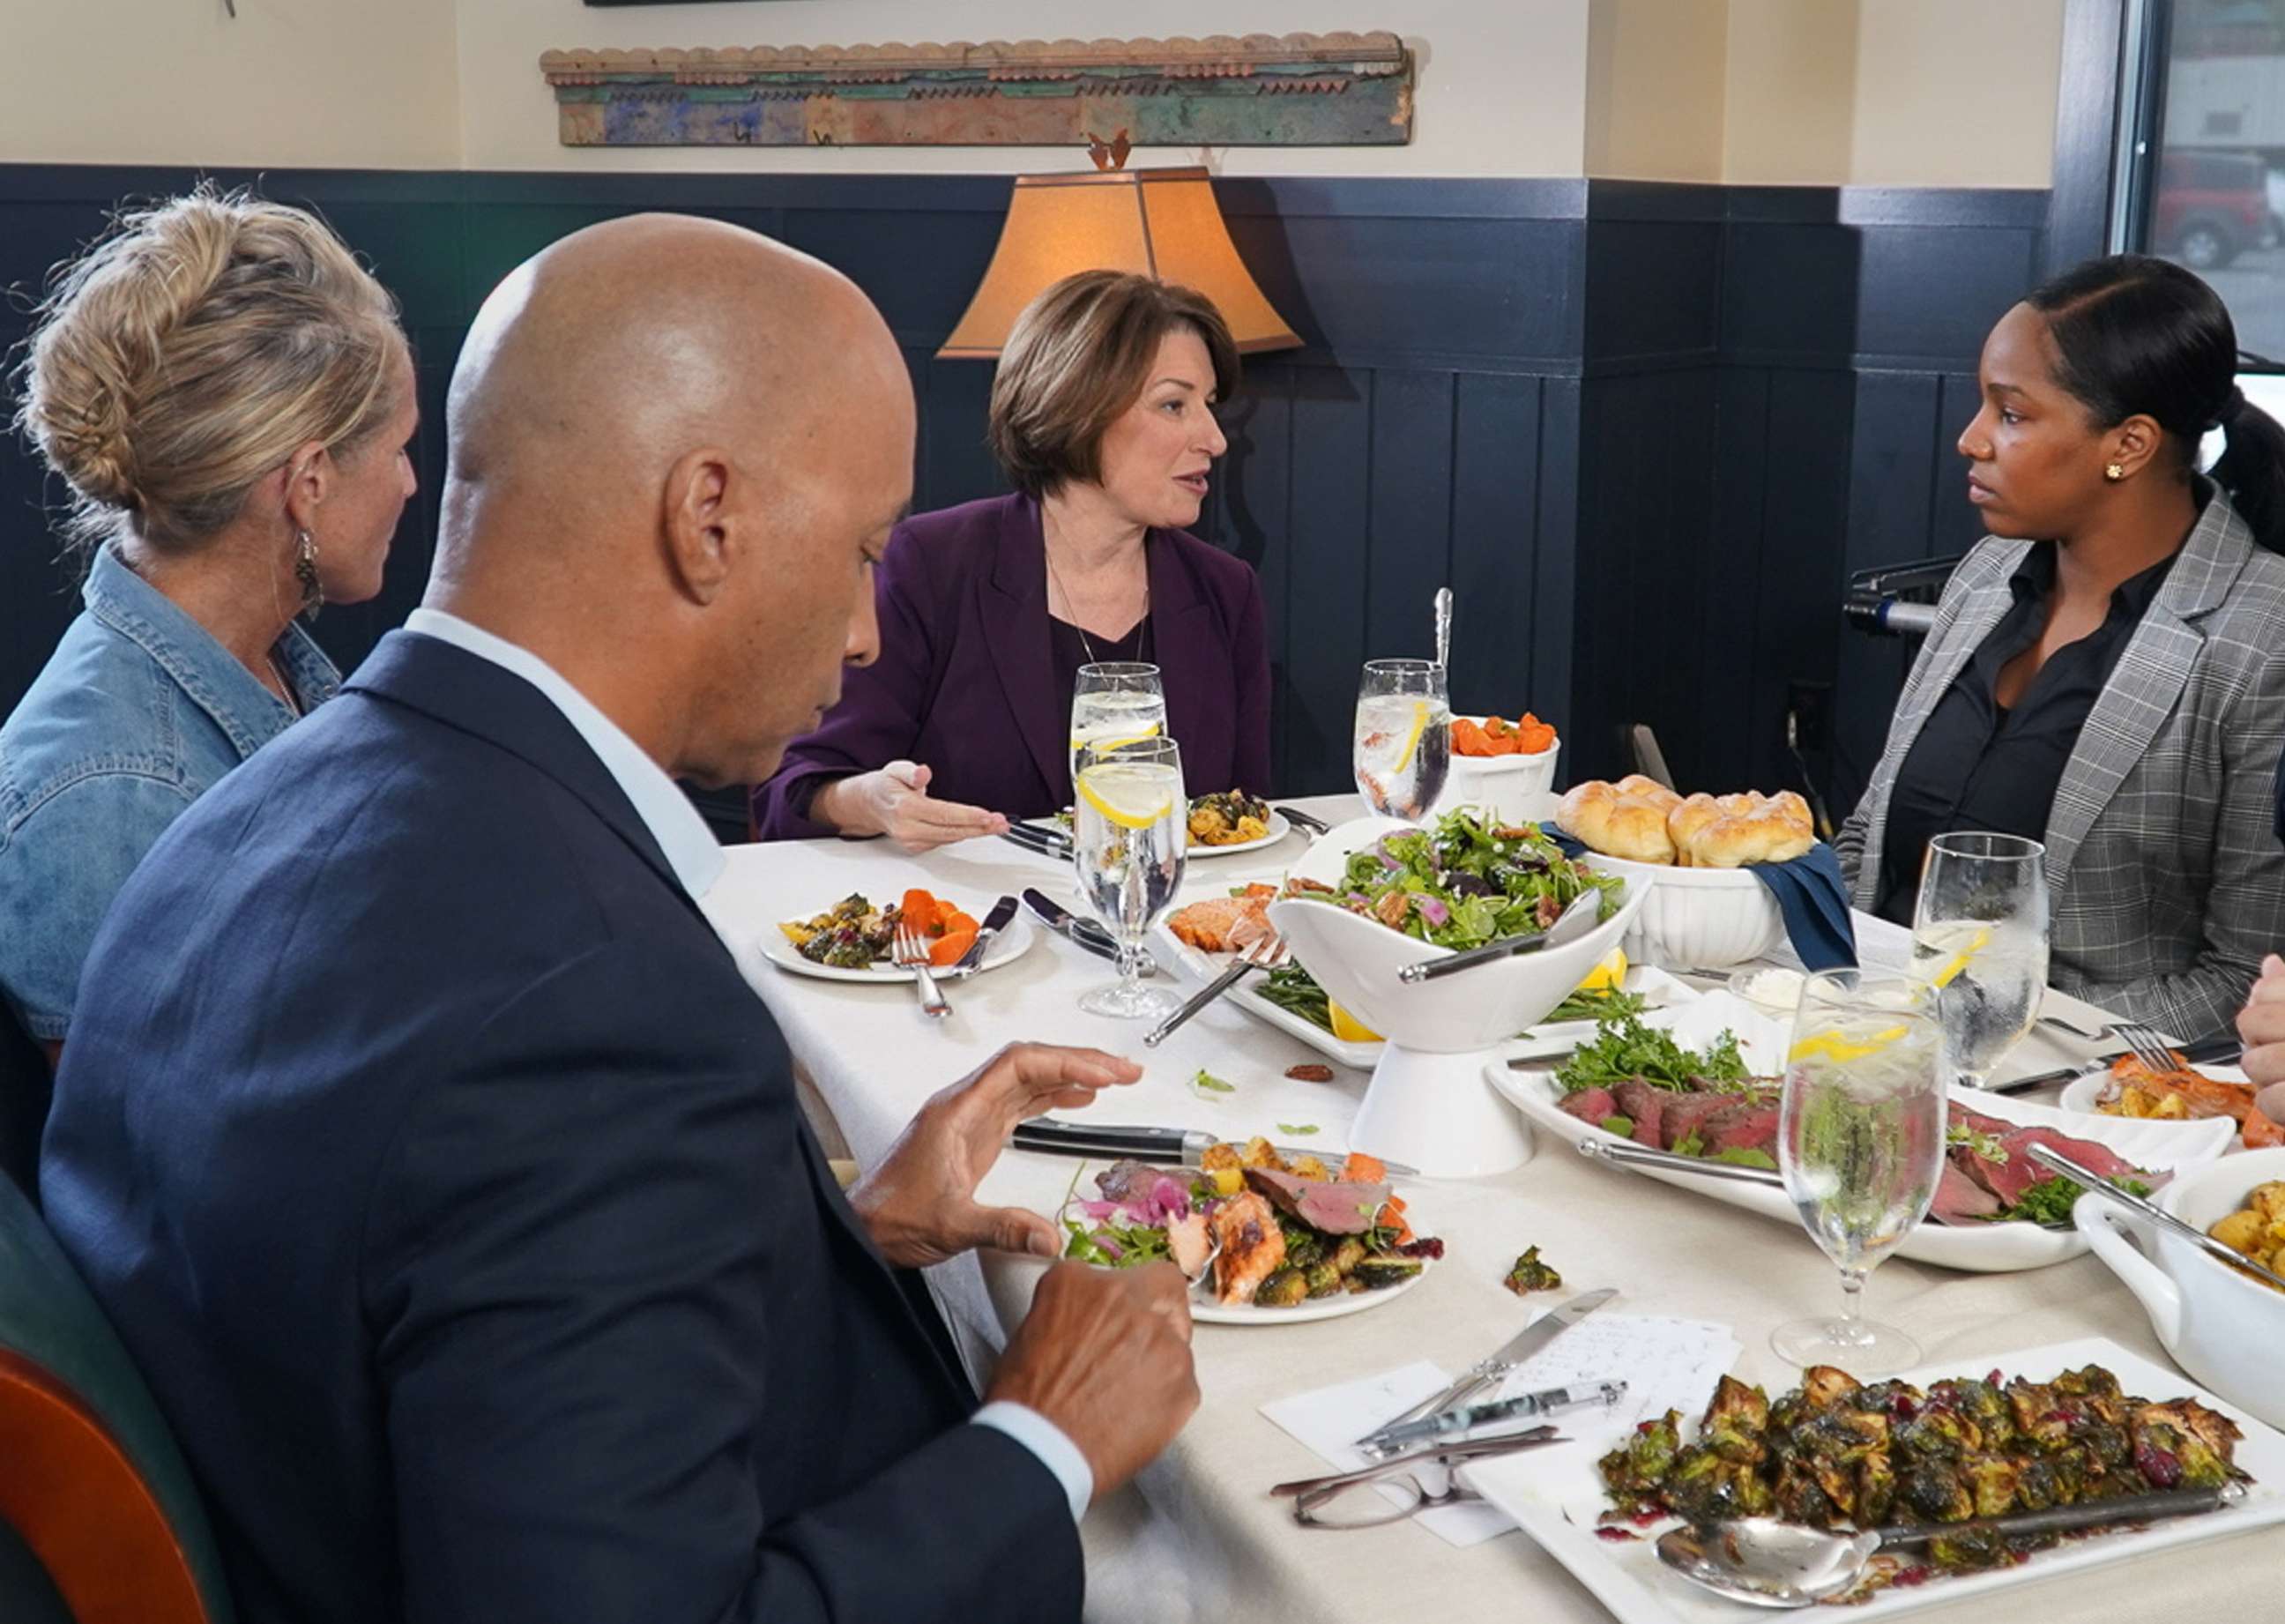 PHOTO: ABC News' Byron Pitts moderates a conversation with 2020 Democratic presidential candidate Amy Klobuchar on the campaign trail and three undecided voters at a restaurant in Bedford, N.H.